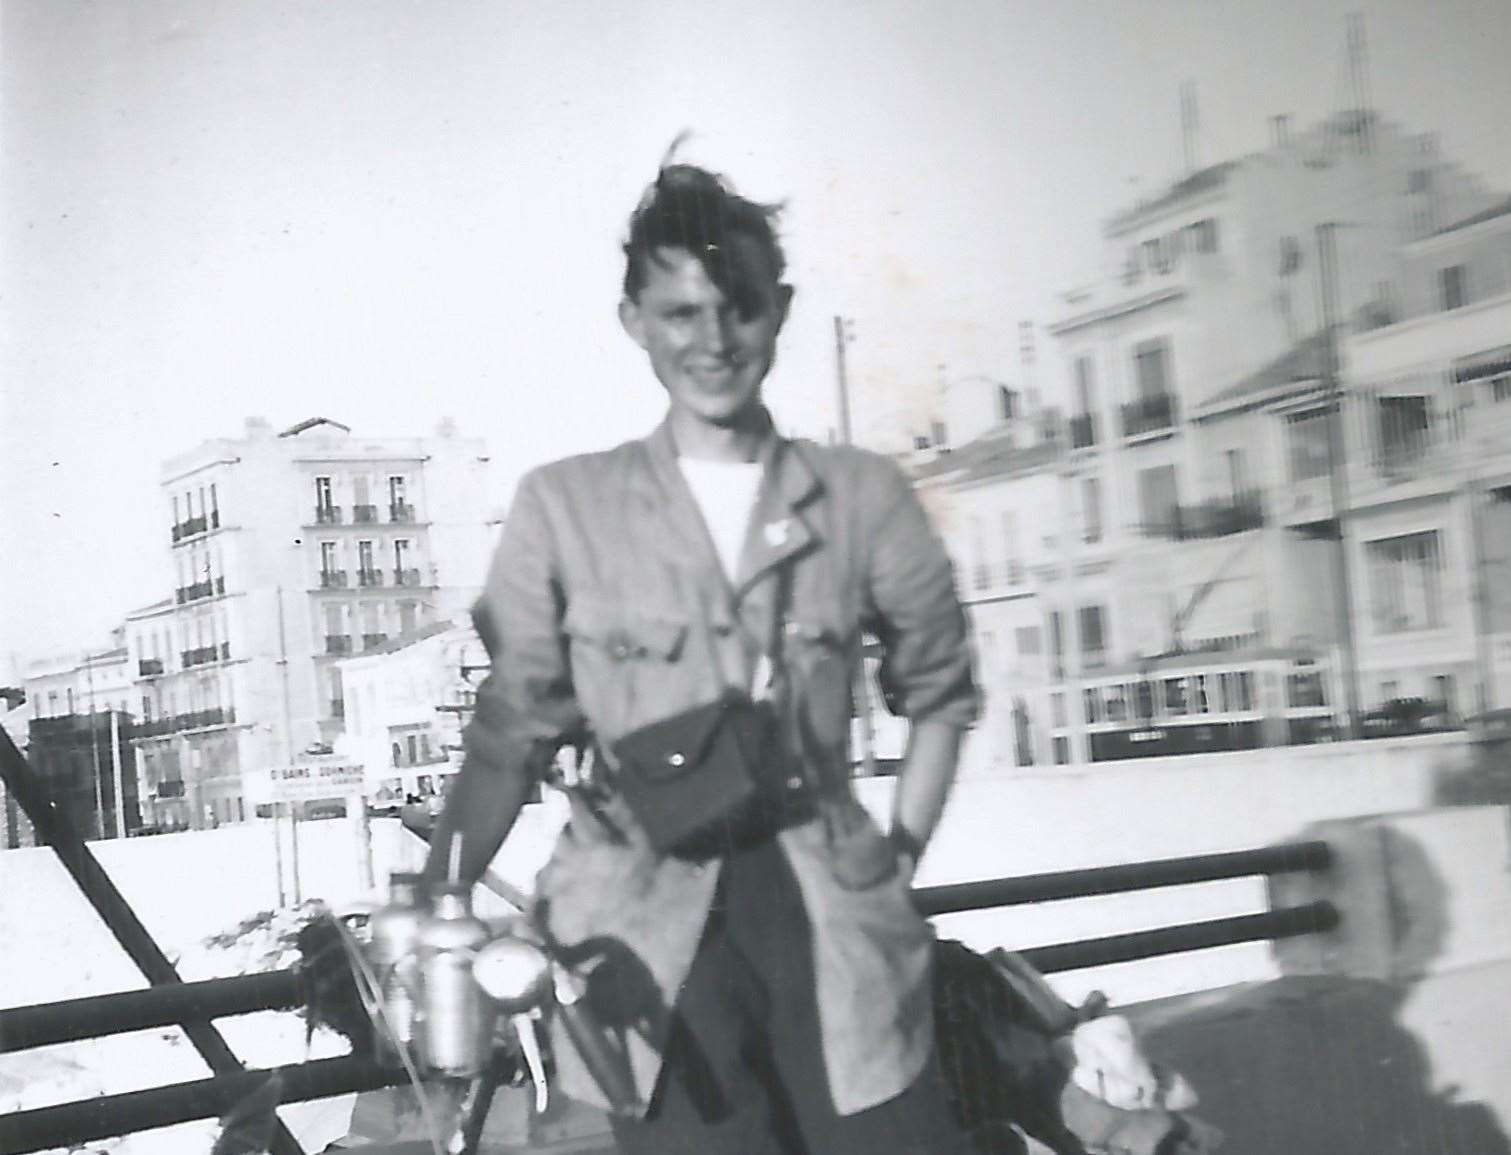 John Holland took part in a French cycle trip from September 14-30 in 1951